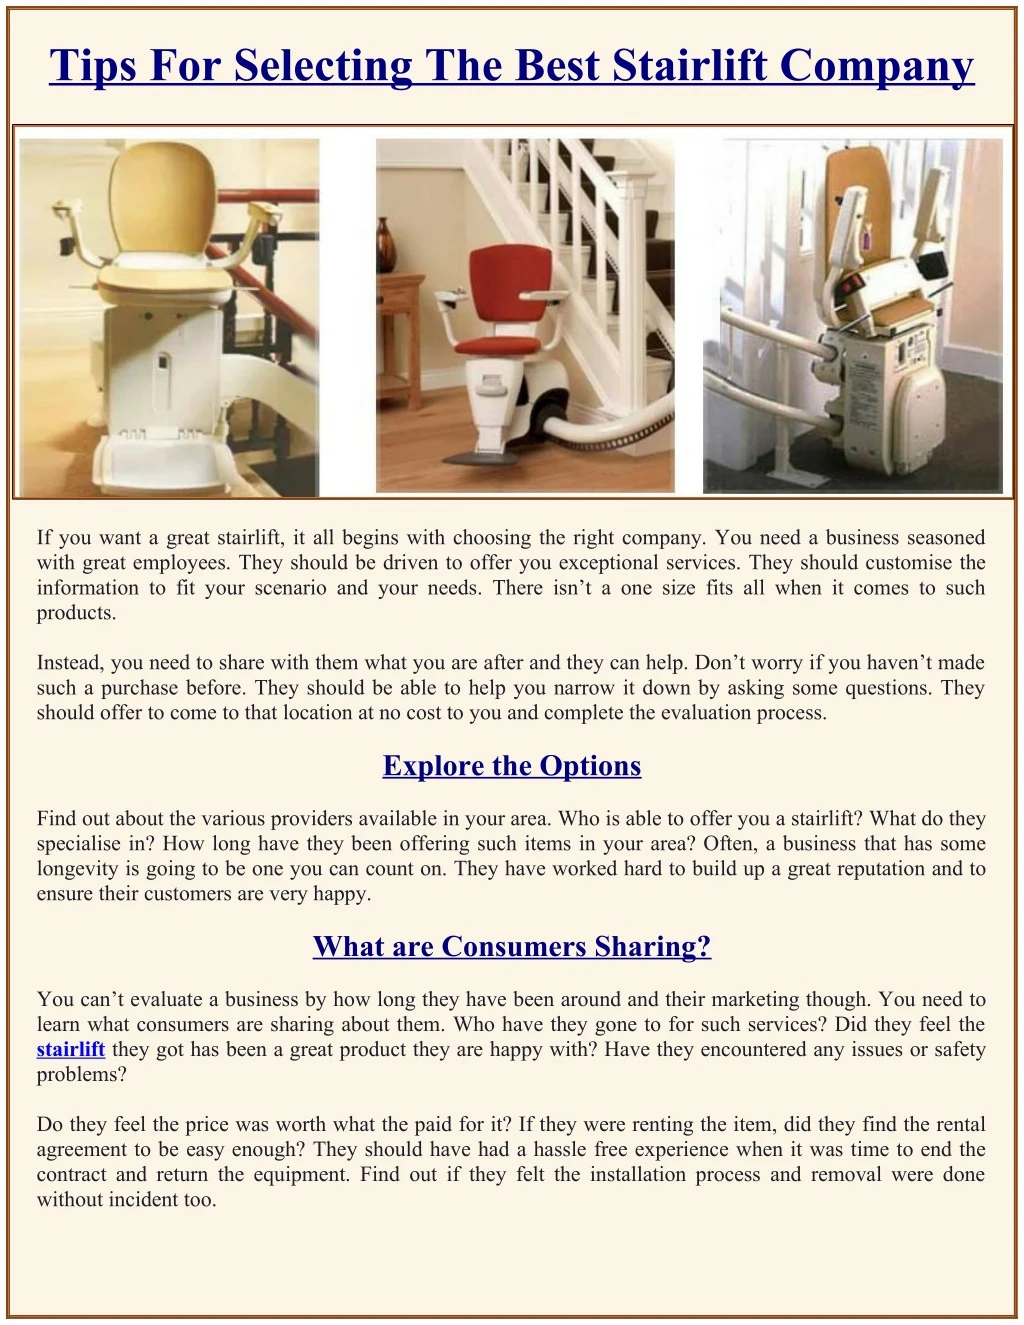 tips for selecting the best stairlift company